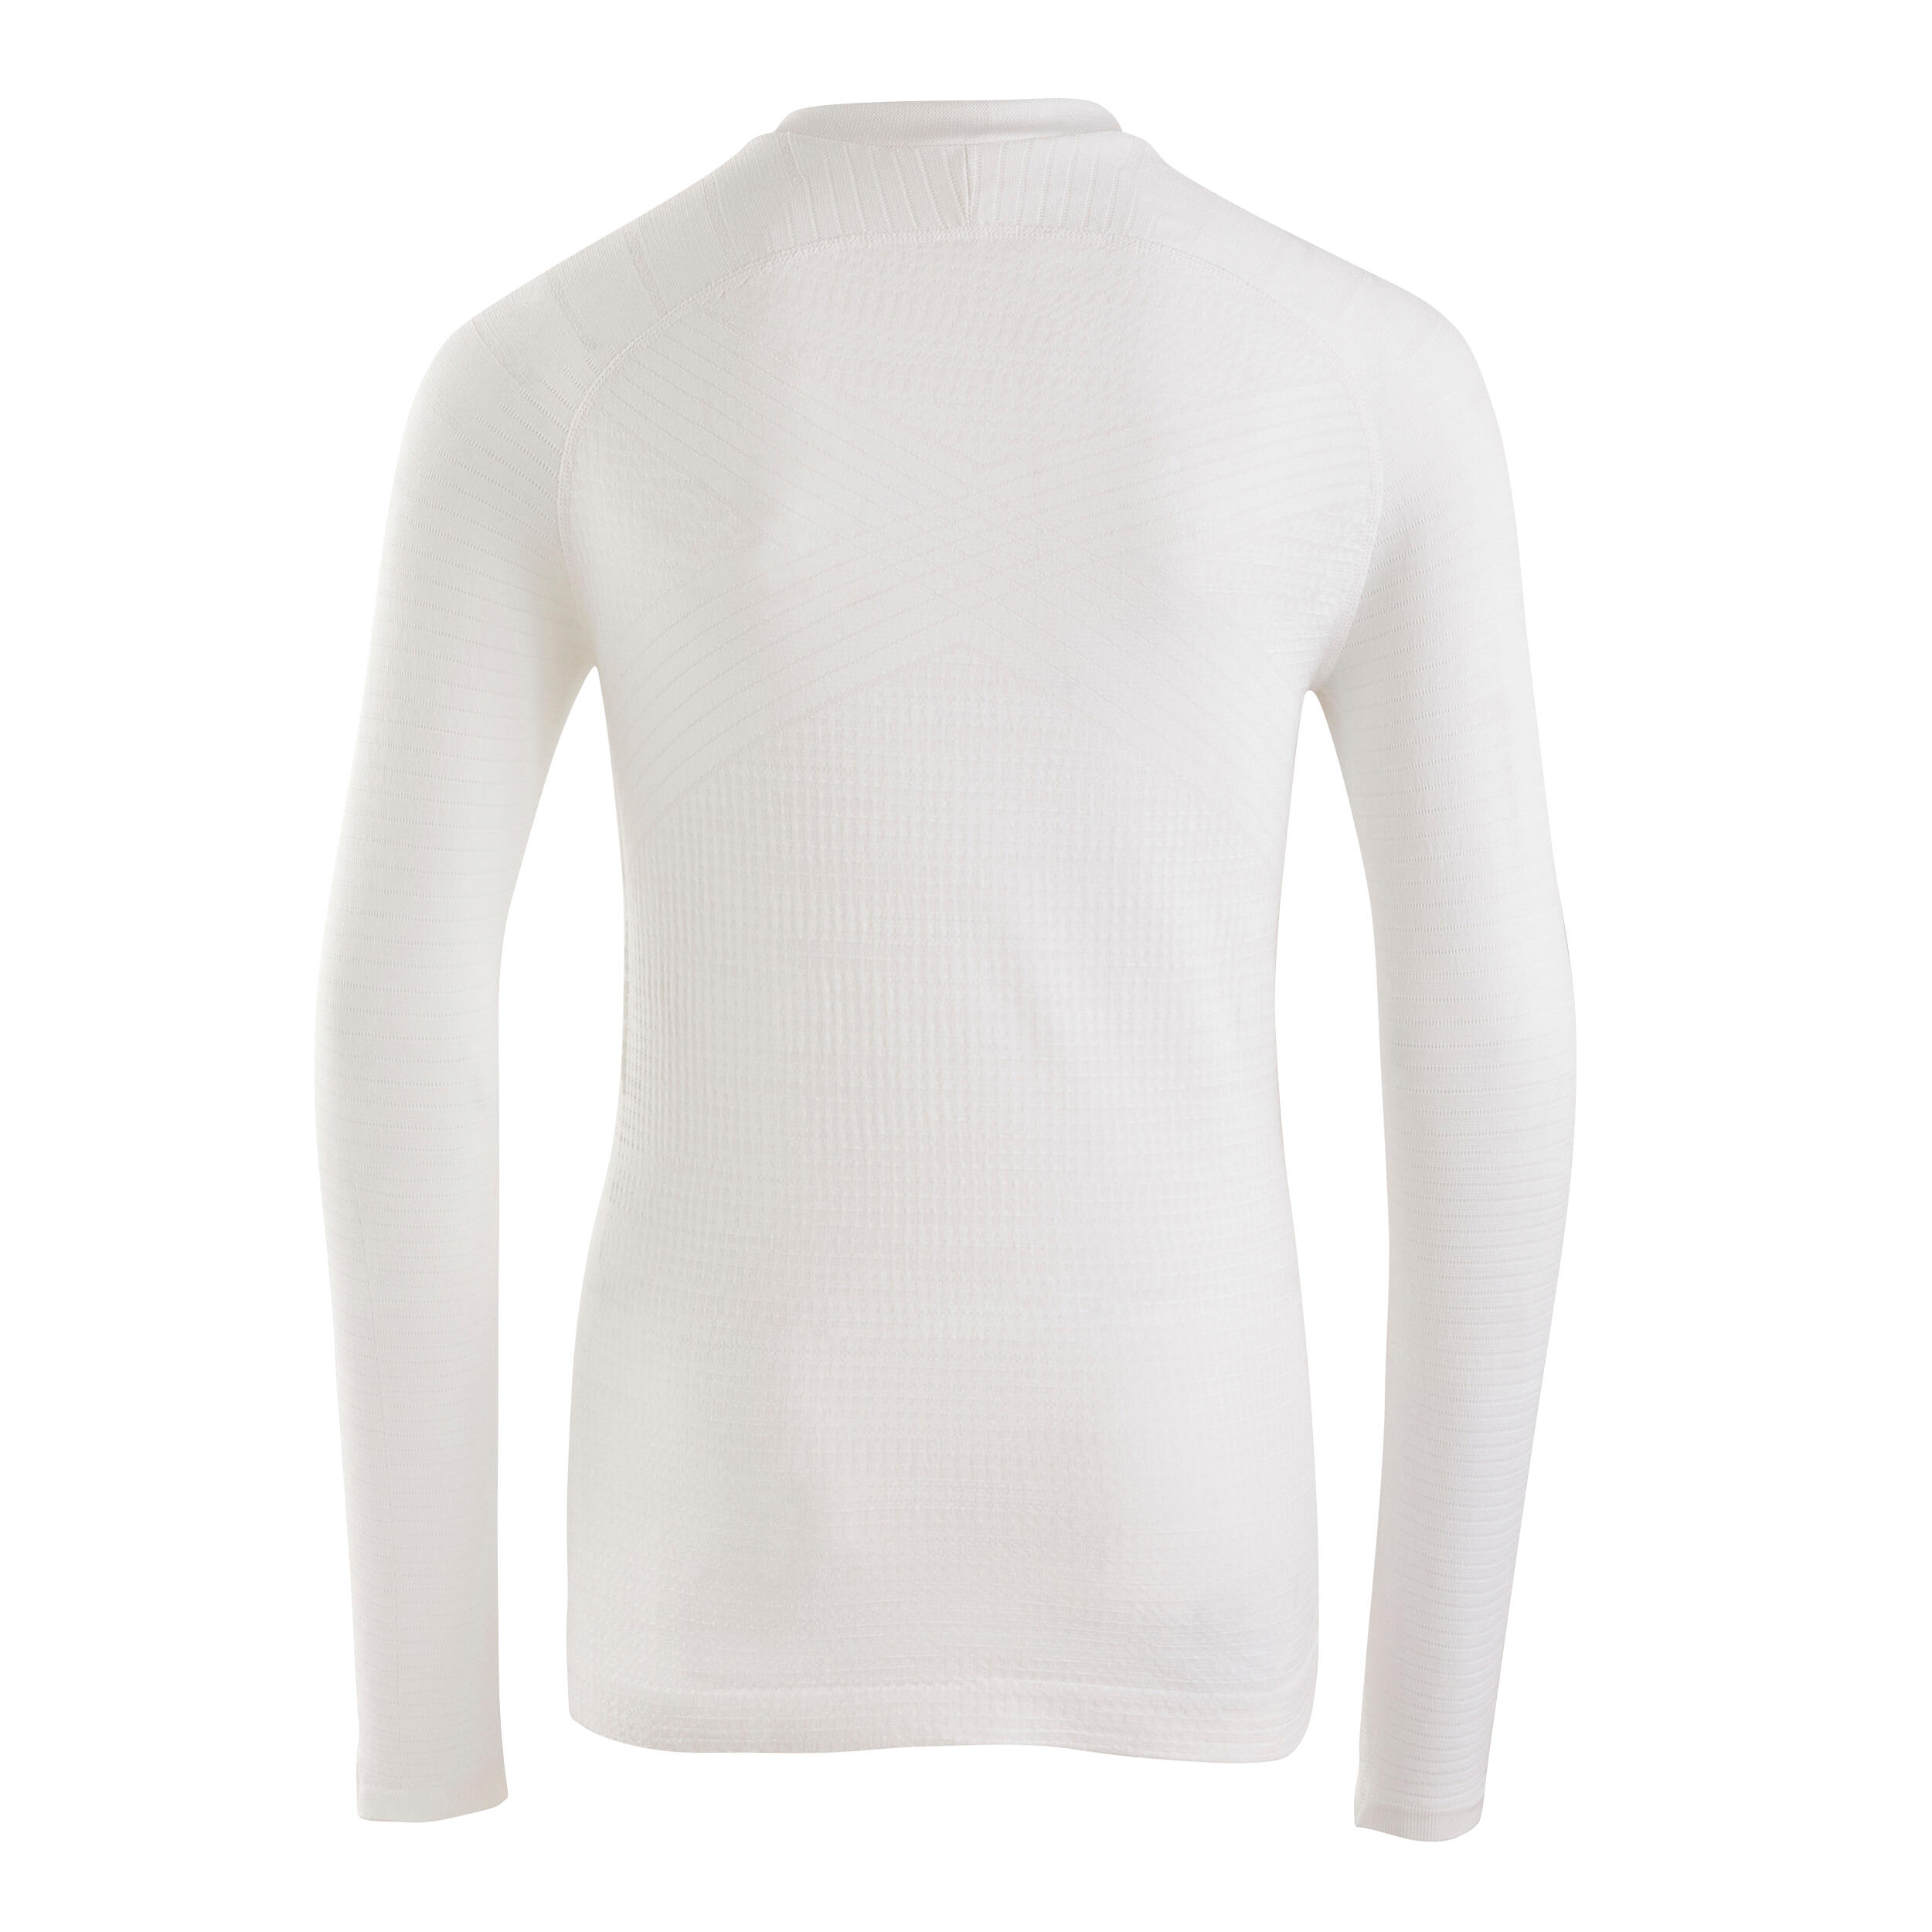 Kids' Long-Sleeved Thermal Base Layer Top Keepdry 500 - White 3/11